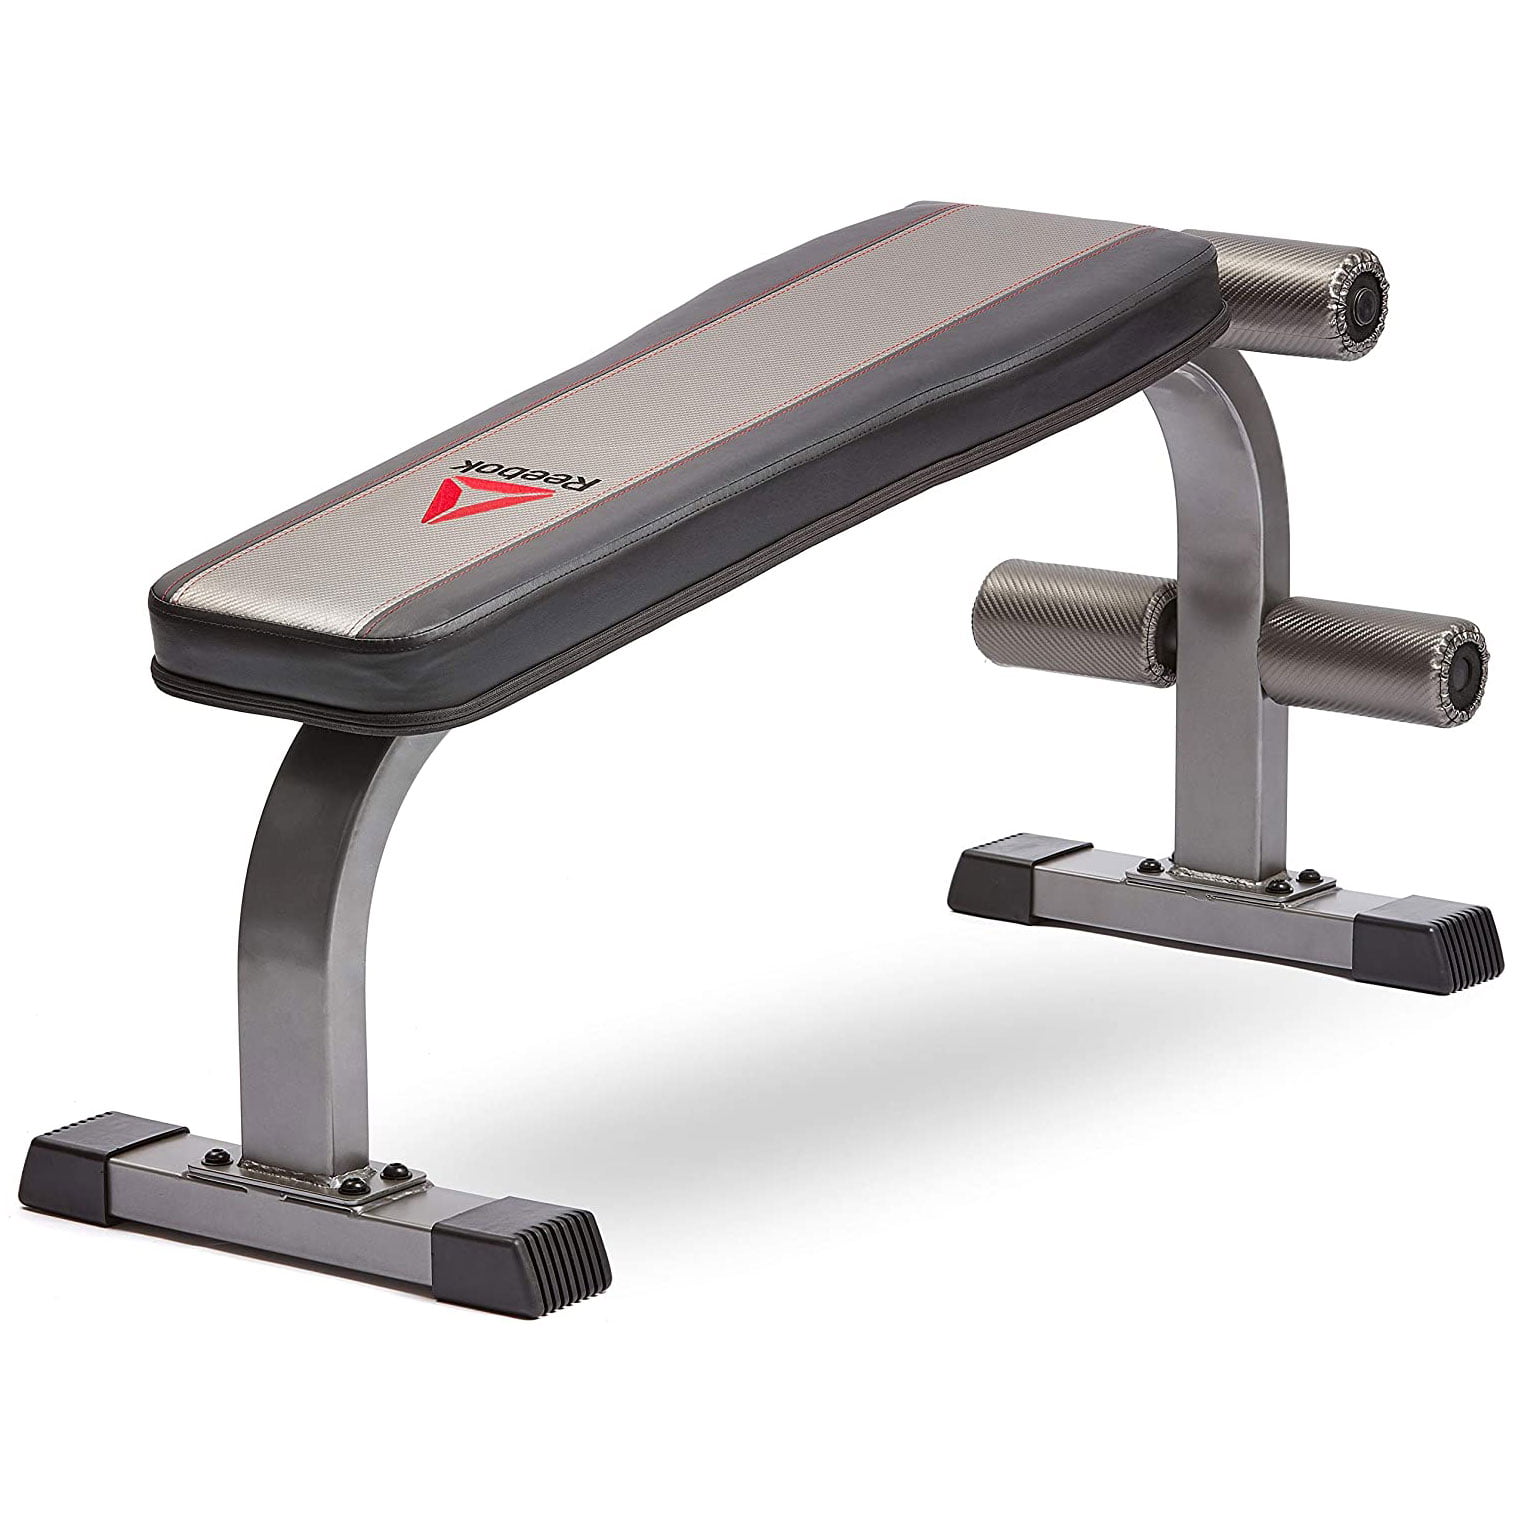 Reebok RBBE-10220 Gym Exercise Equipment Ab Workout Board Bench - Walmart.com